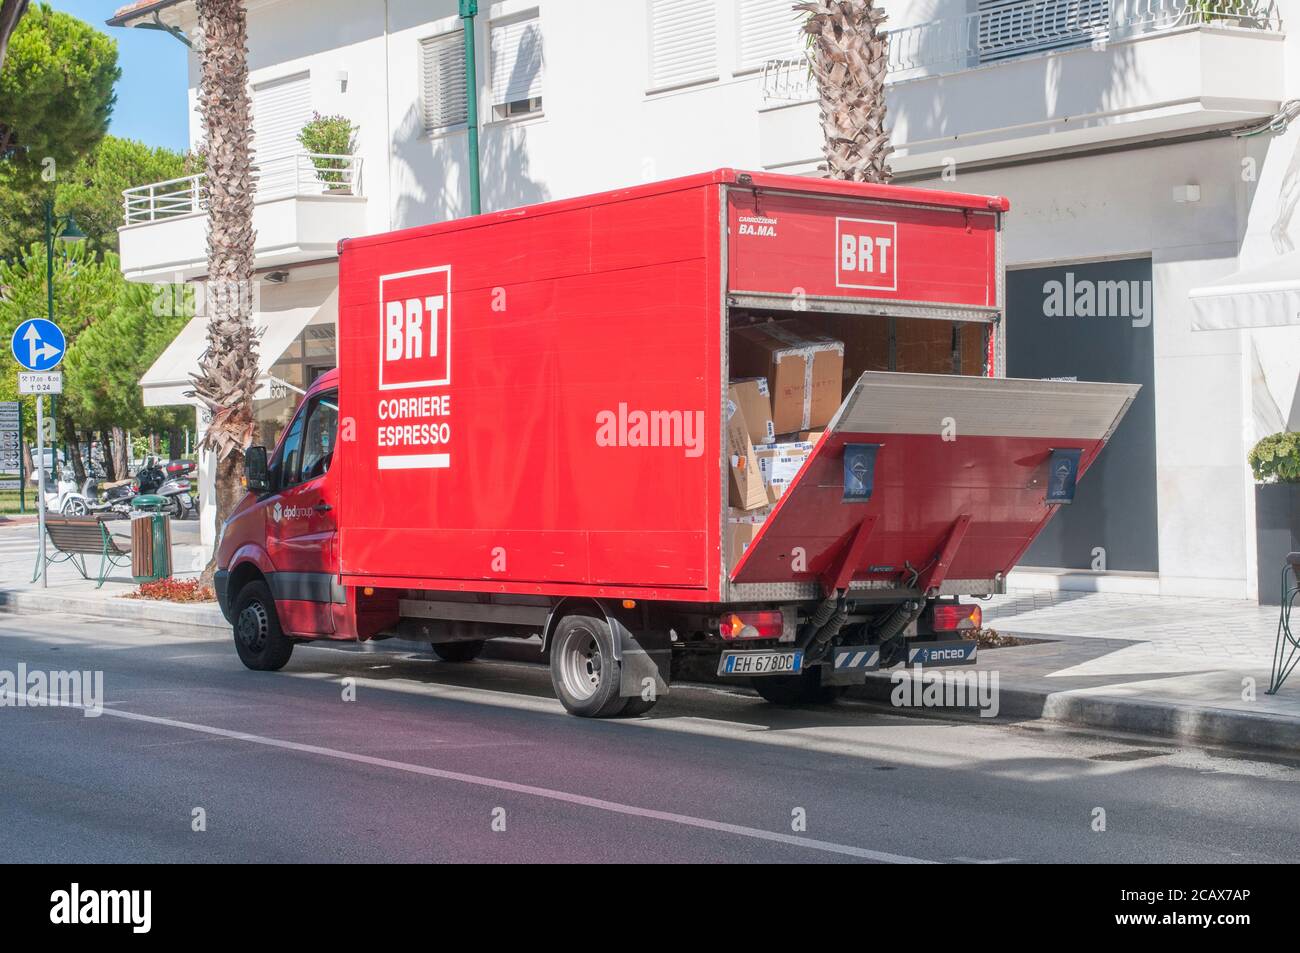 Forte dei Marmi, Italy - August 4, 2020 - A BRT (Bartolini) express courier van parked in the city during a delivery Stock Photo